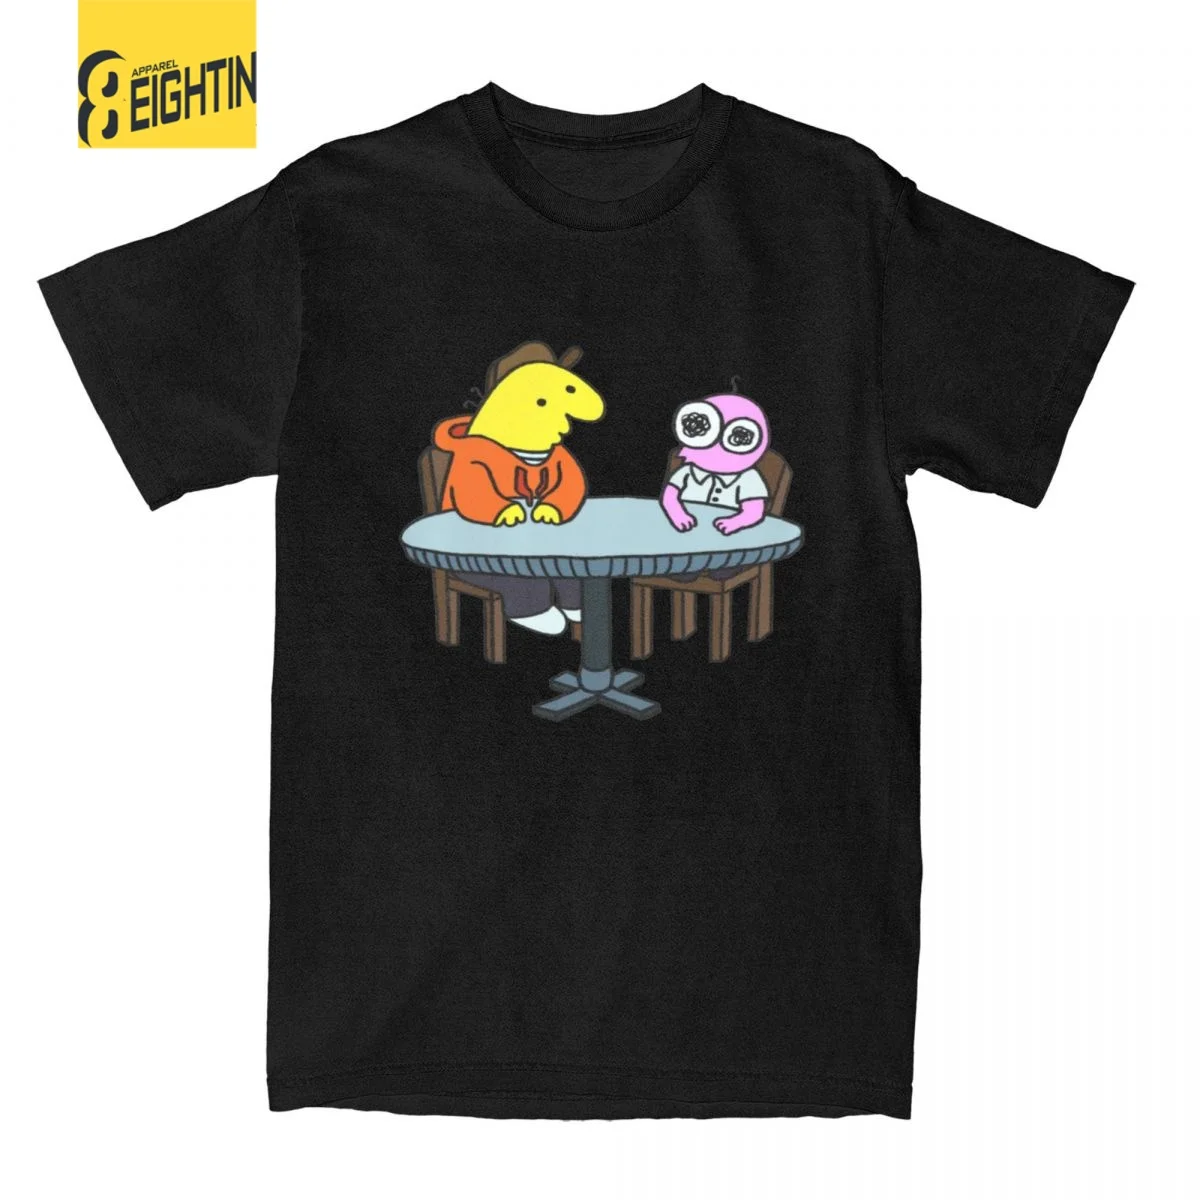 

Smiling Friends Cute Cartoon T-Shirt for Men Hipster Pure Cotton Tee Shirt Round Collar Short Sleeve T Shirts Classic Clothes